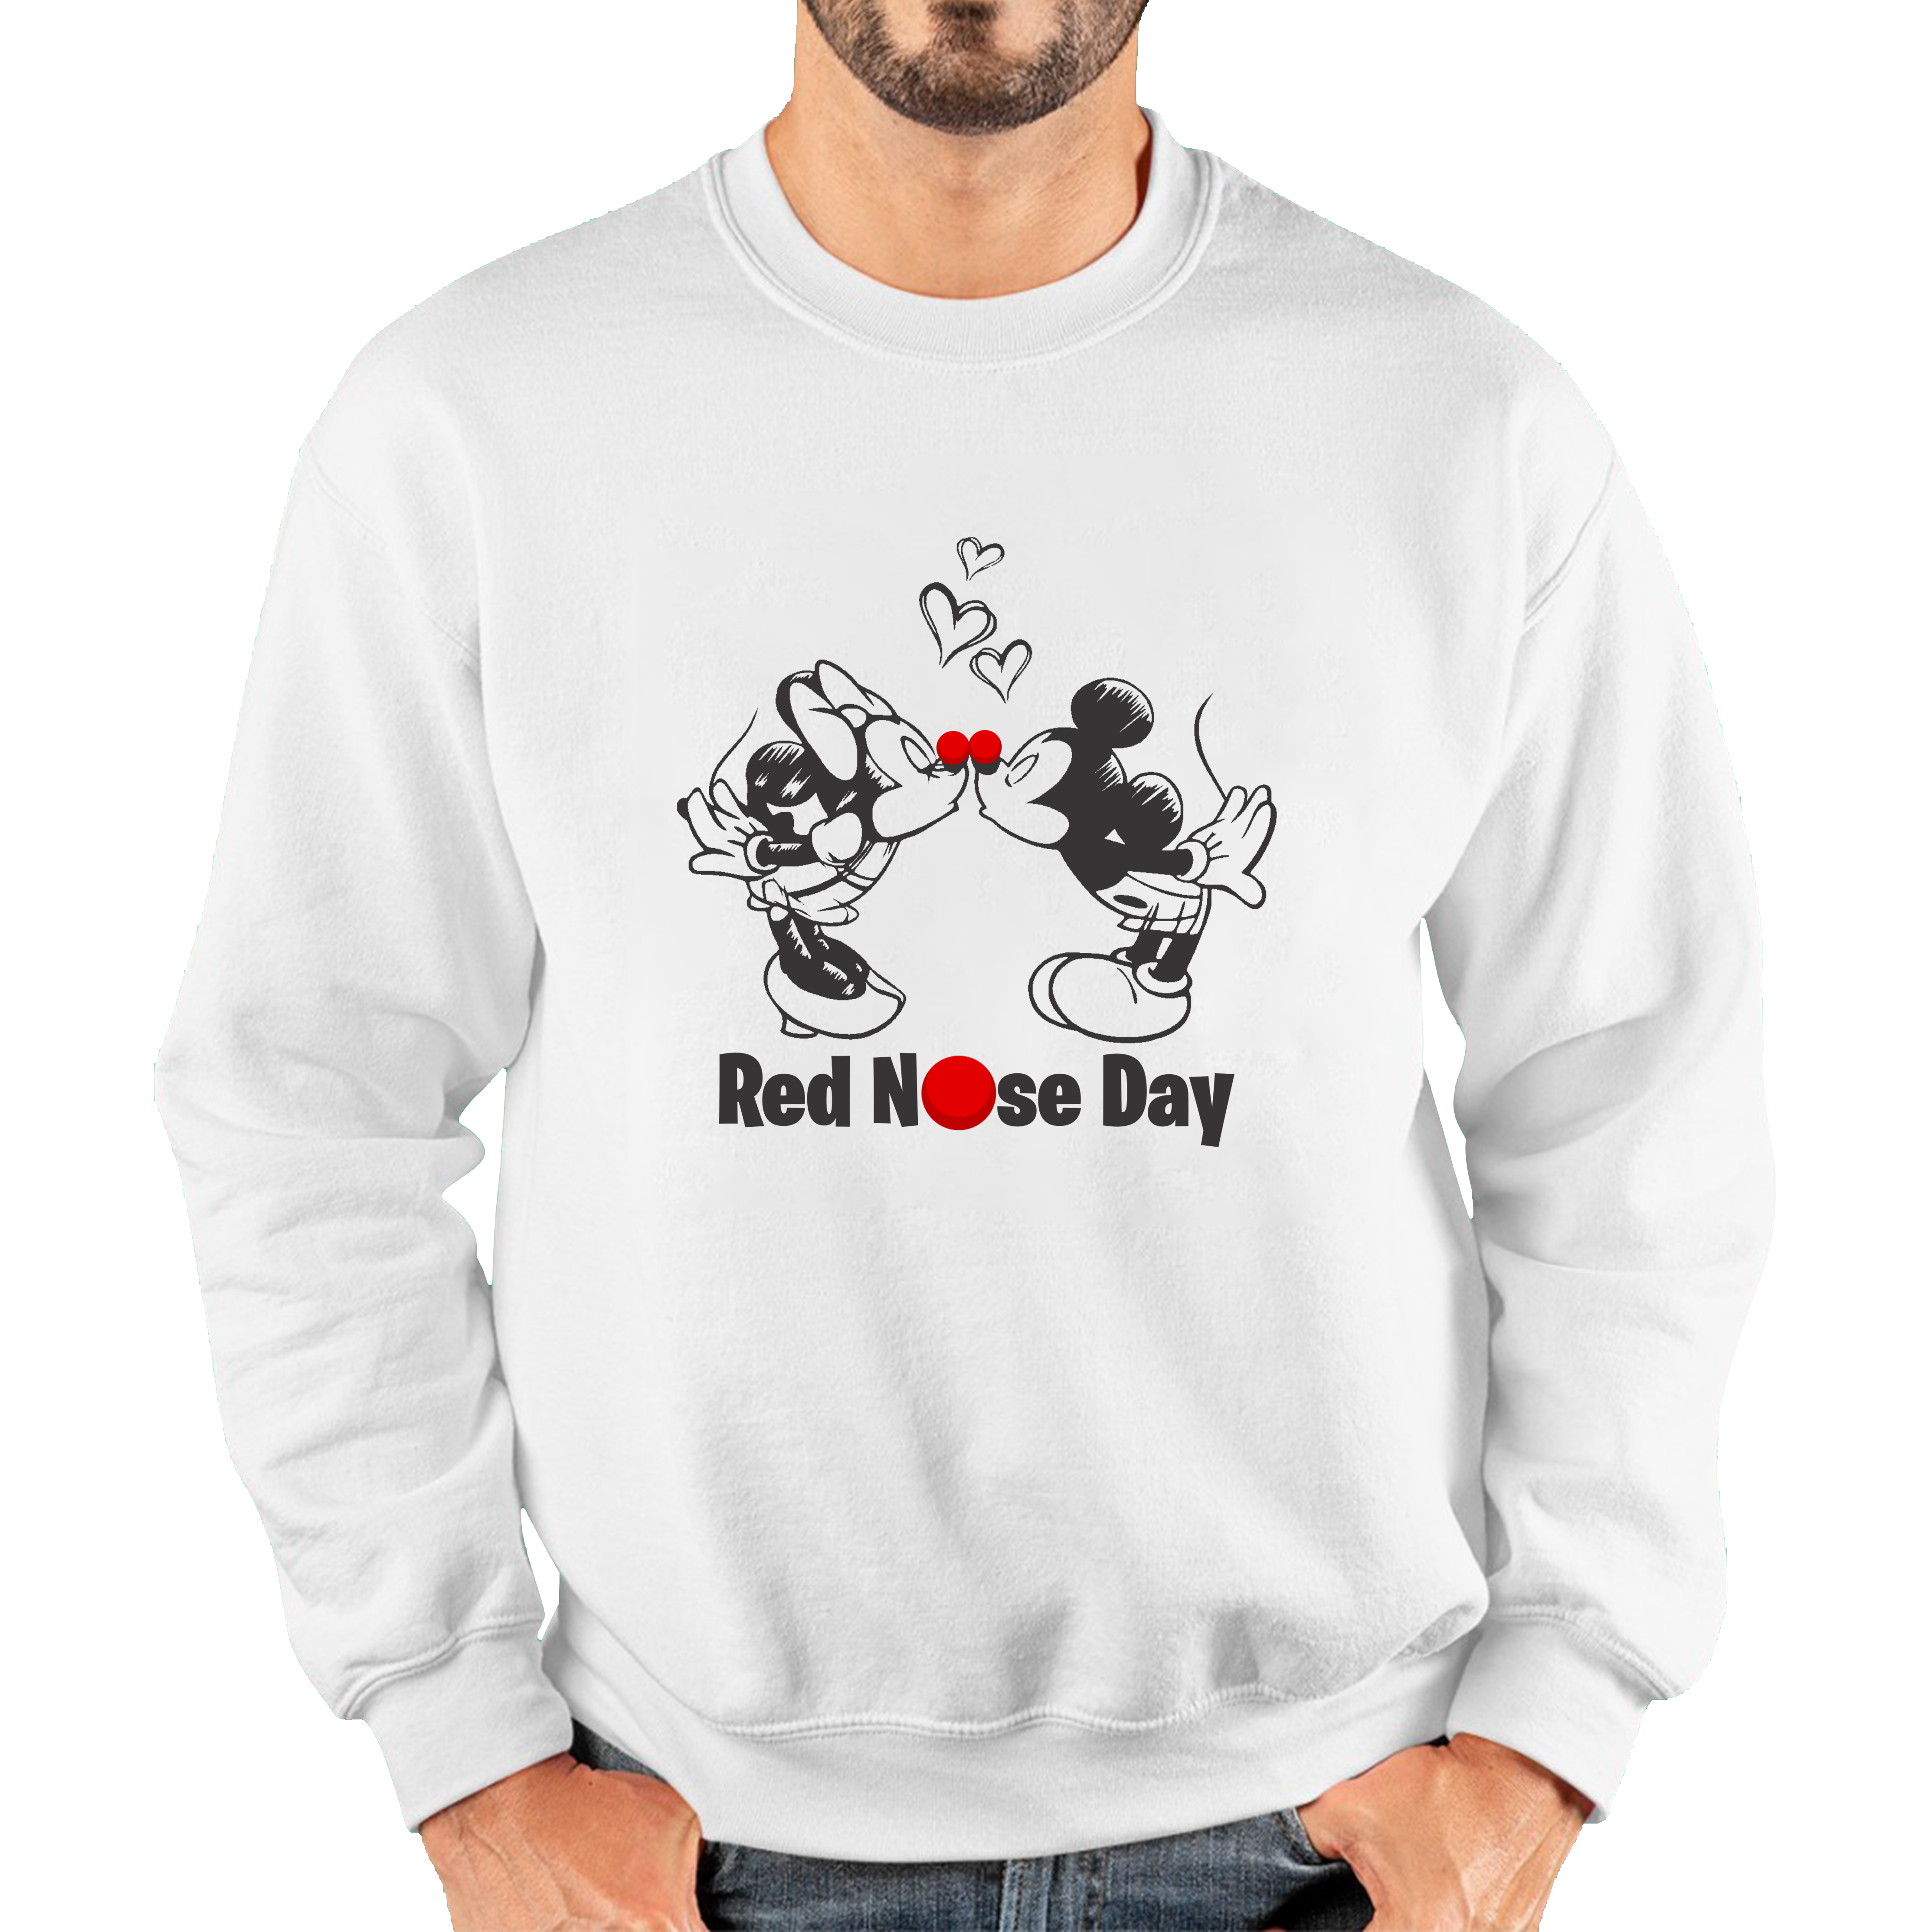 Disney Mickey And Minnie Mouse Red Nose Day Adult Sweatshirt. 50% Goes To Charity